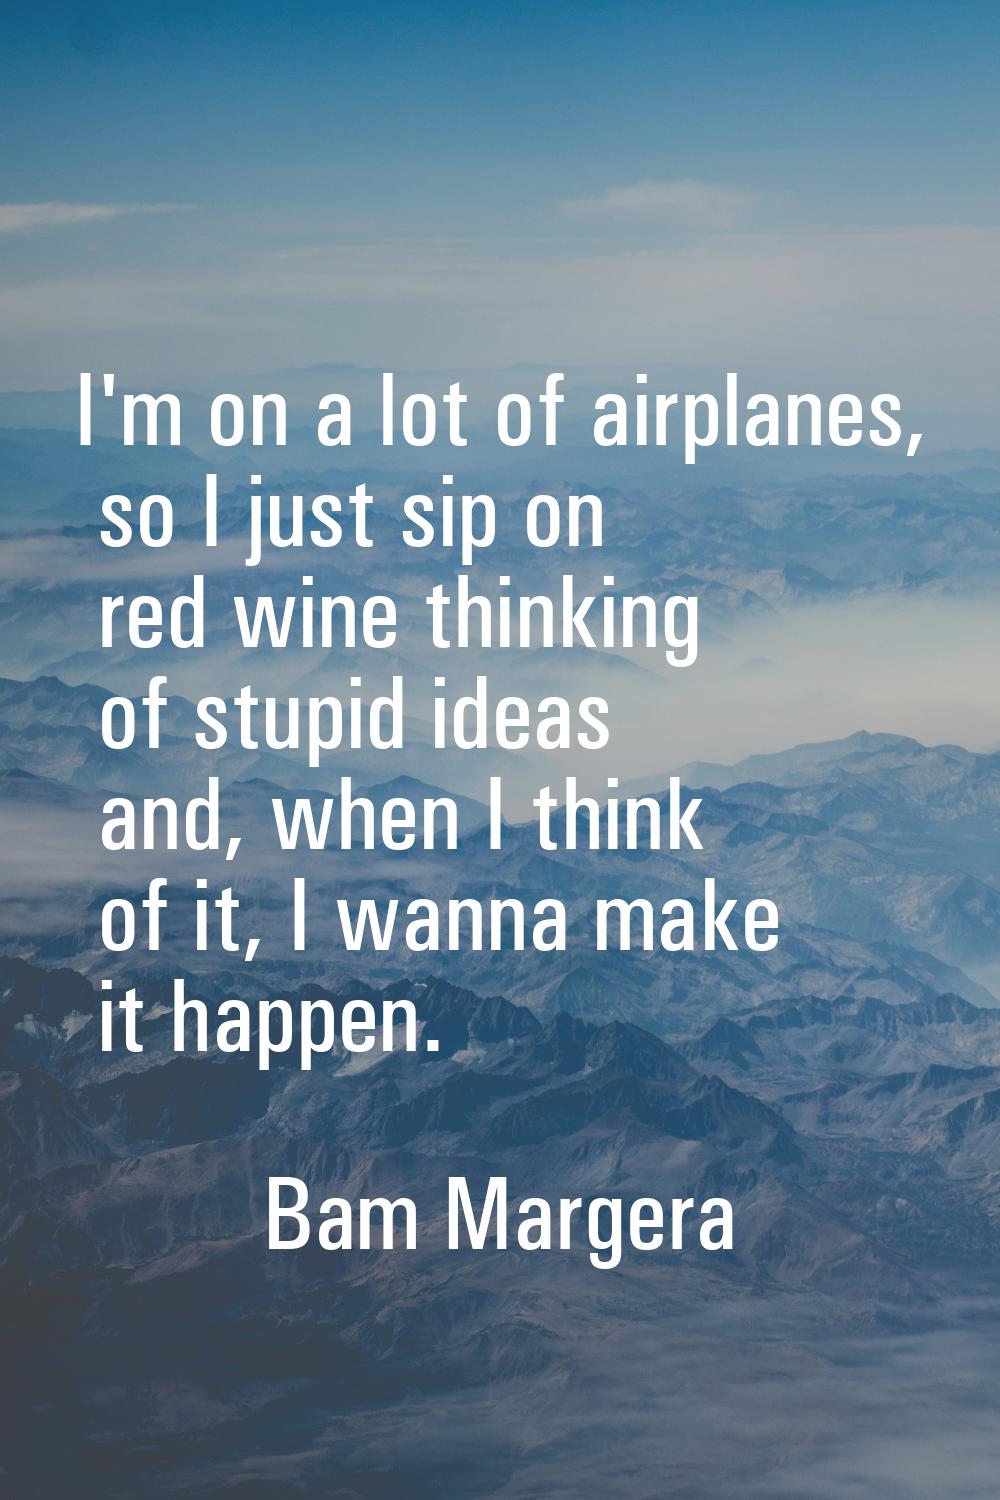 I'm on a lot of airplanes, so I just sip on red wine thinking of stupid ideas and, when I think of 